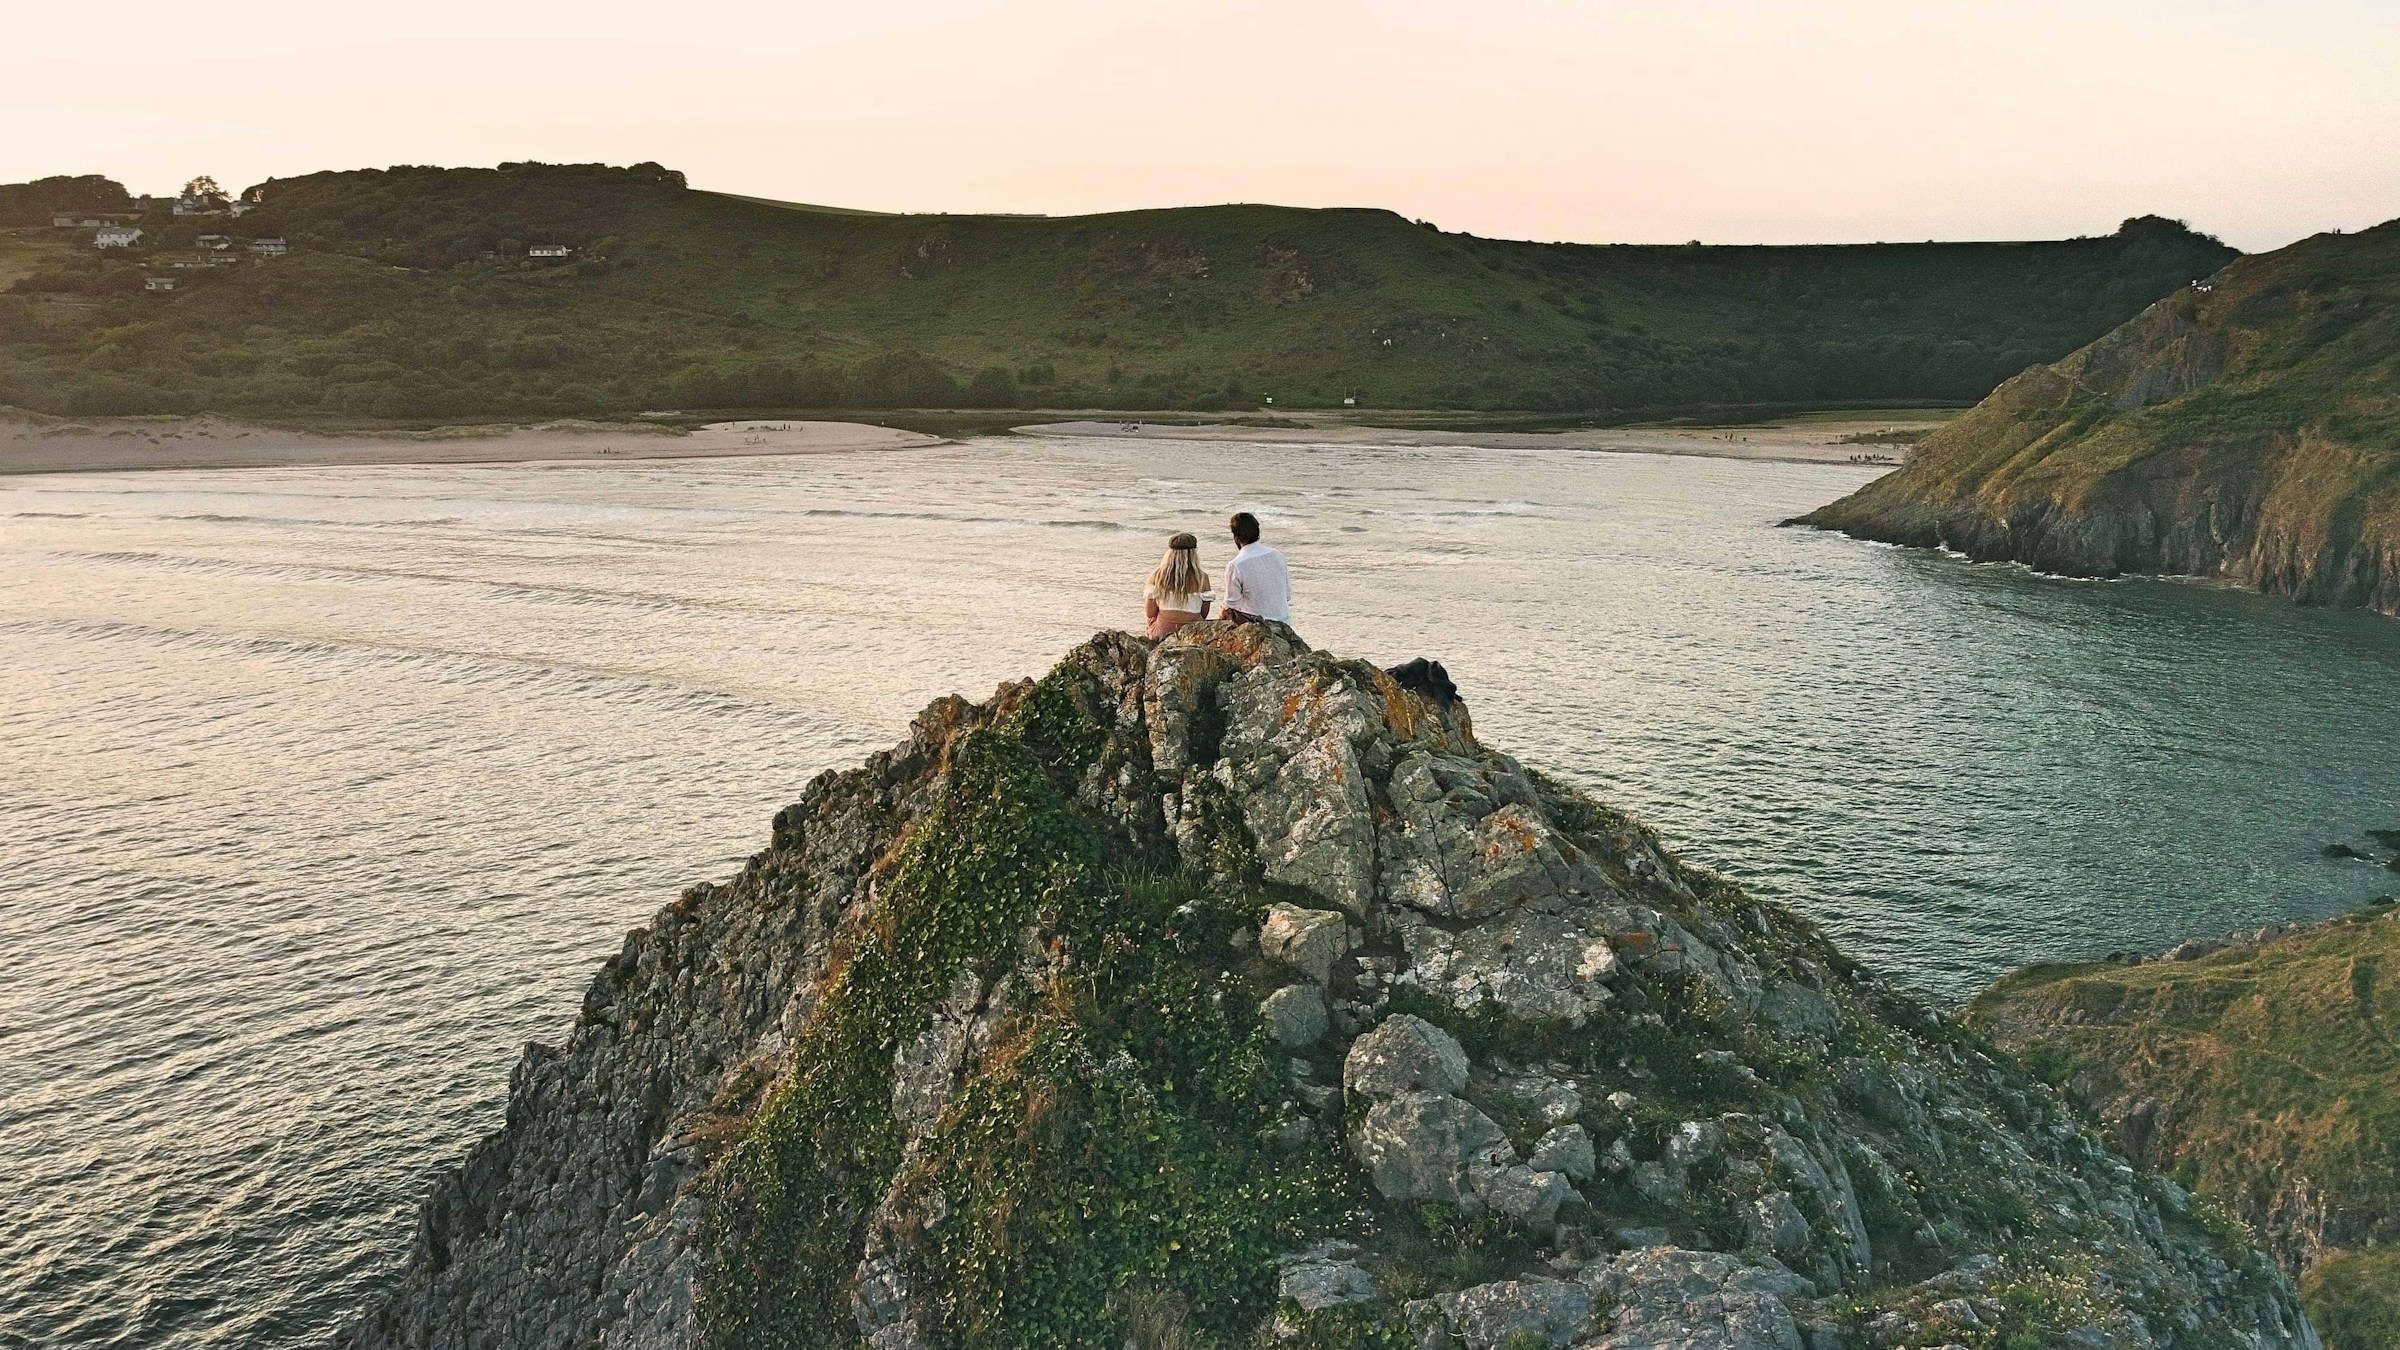 A couple sitting on a rock in the water